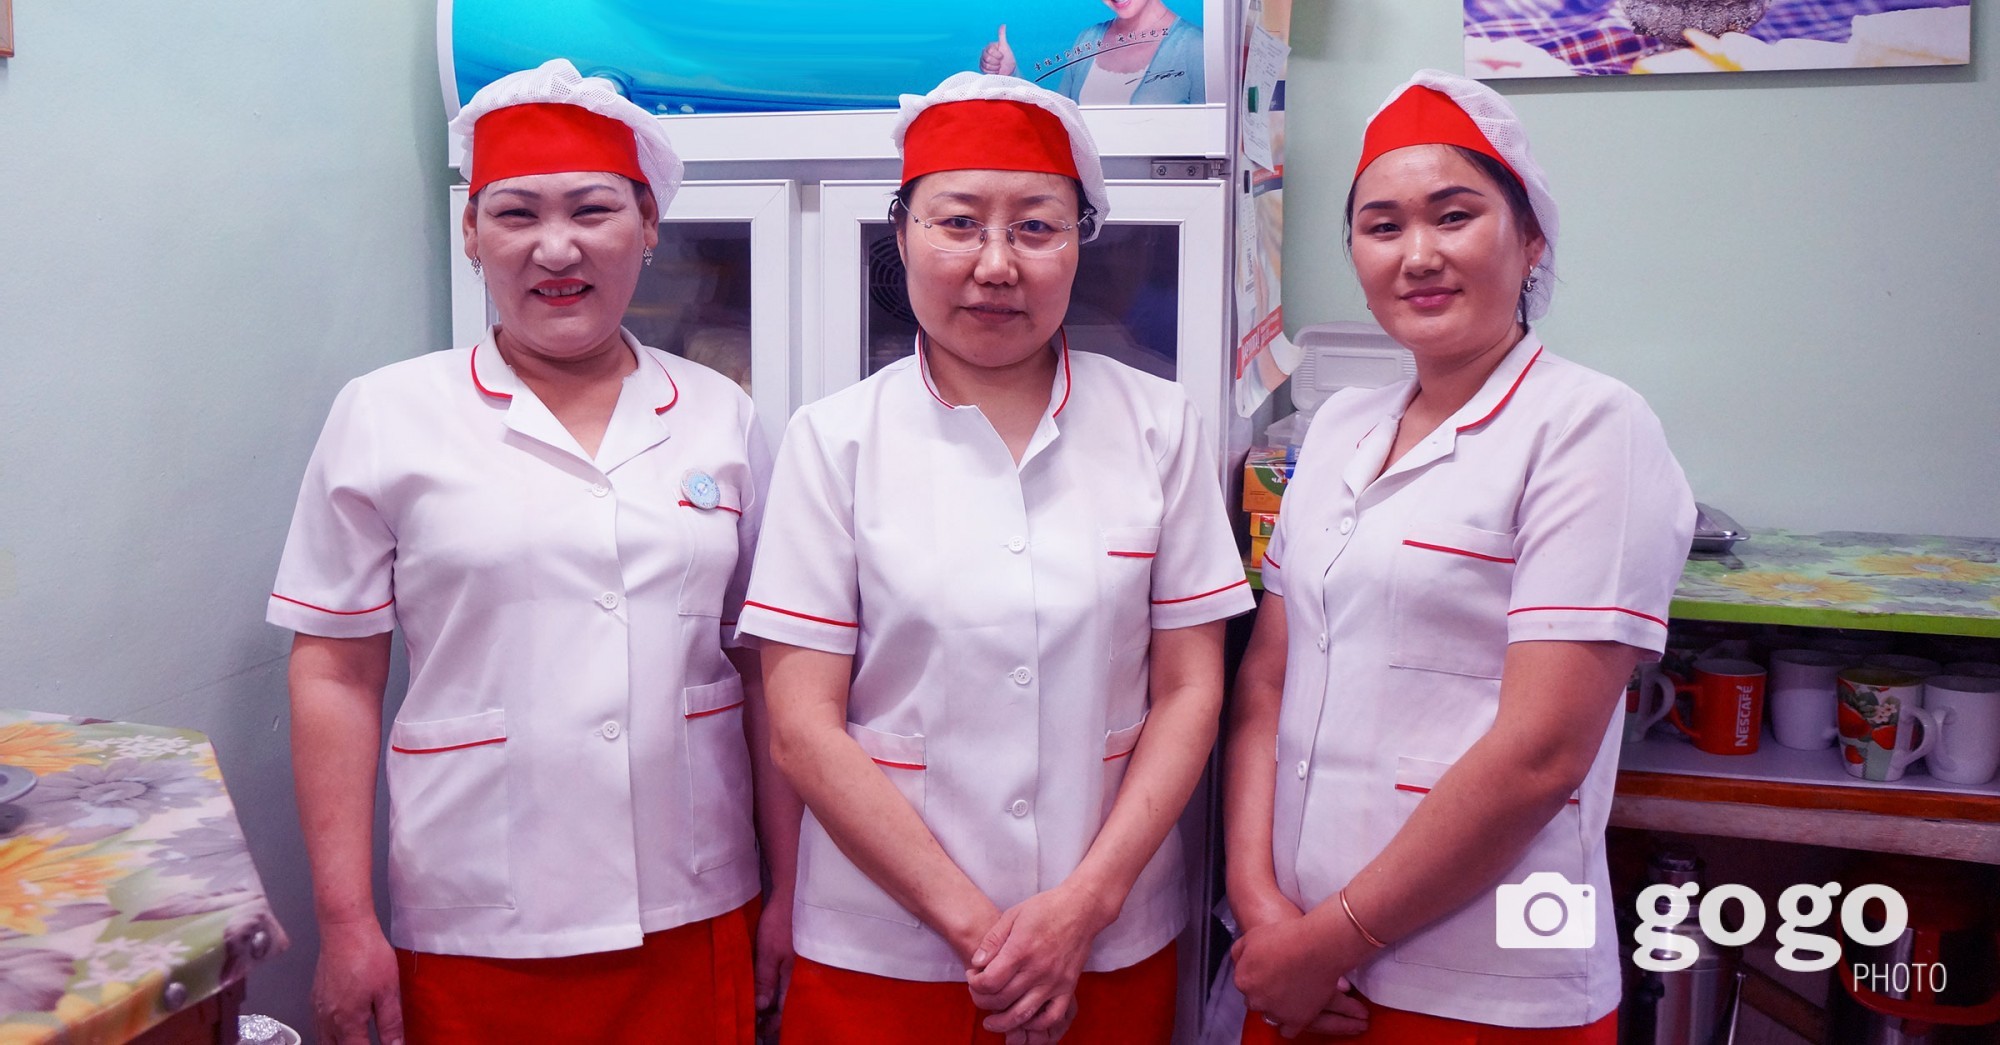 Ts.Altantsetseg, T.Tsolmon and Z.Narantuya work at  Maral restaurant. They want all women in Mongolia to be happy and good. 